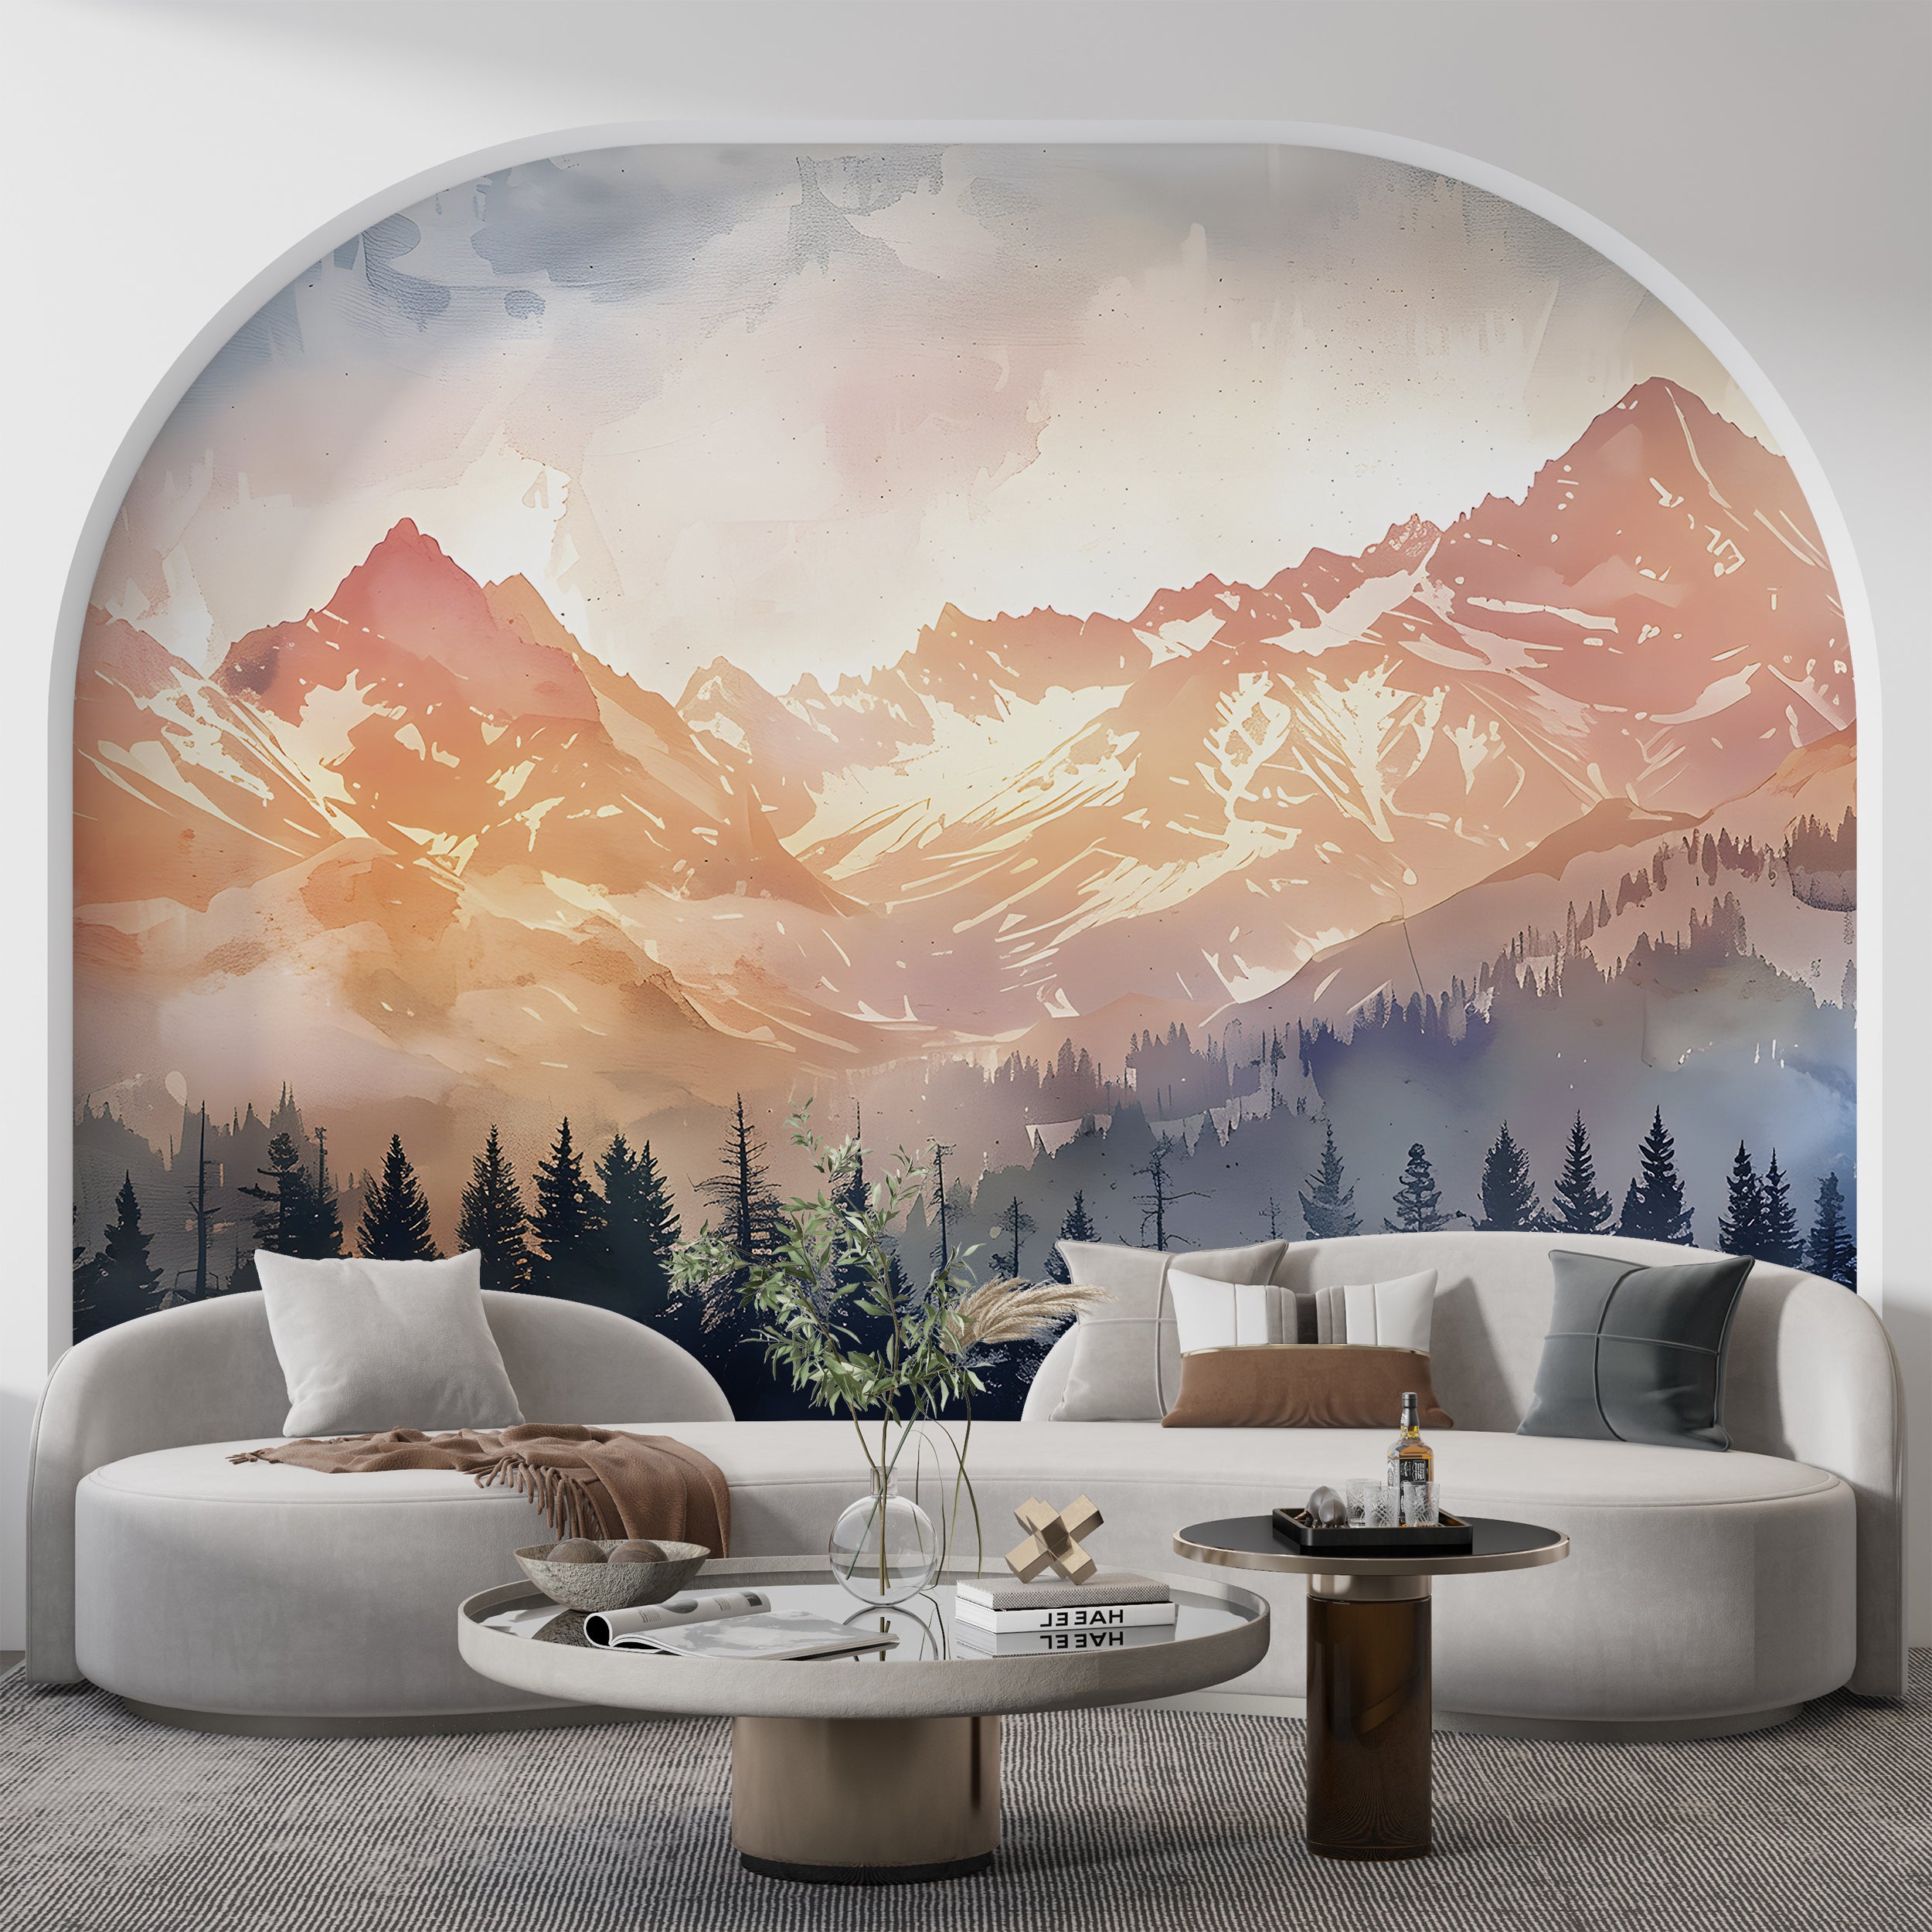 Watercolor Mountain Sunset Wallpaper, Colorful Mountains and Forest Mural, Peel and Stick Orange Landscape Nursery Decal, PVC-free